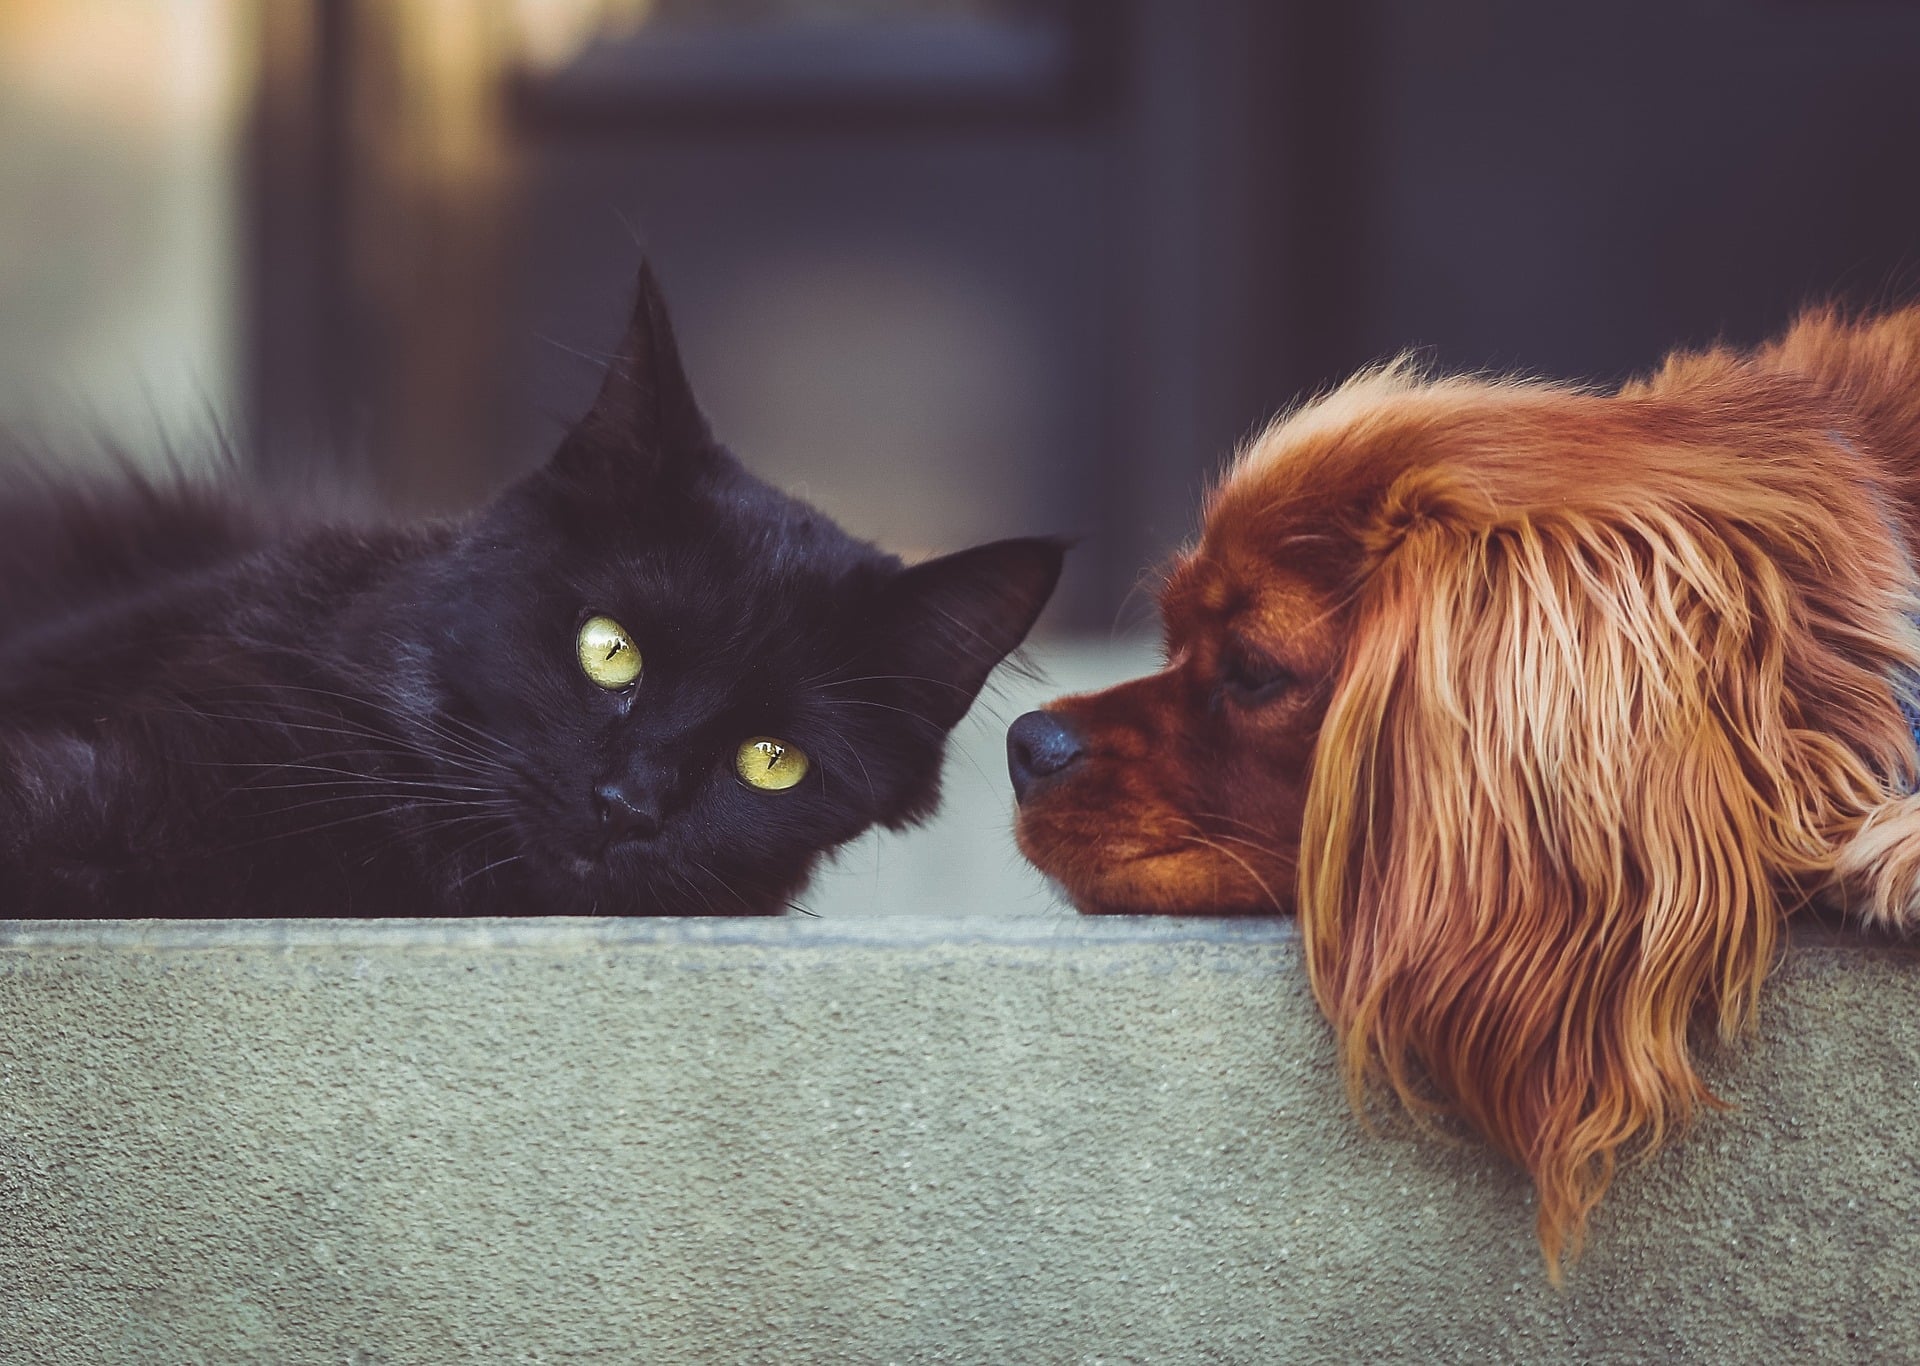 A cat and dog rest peacefully together